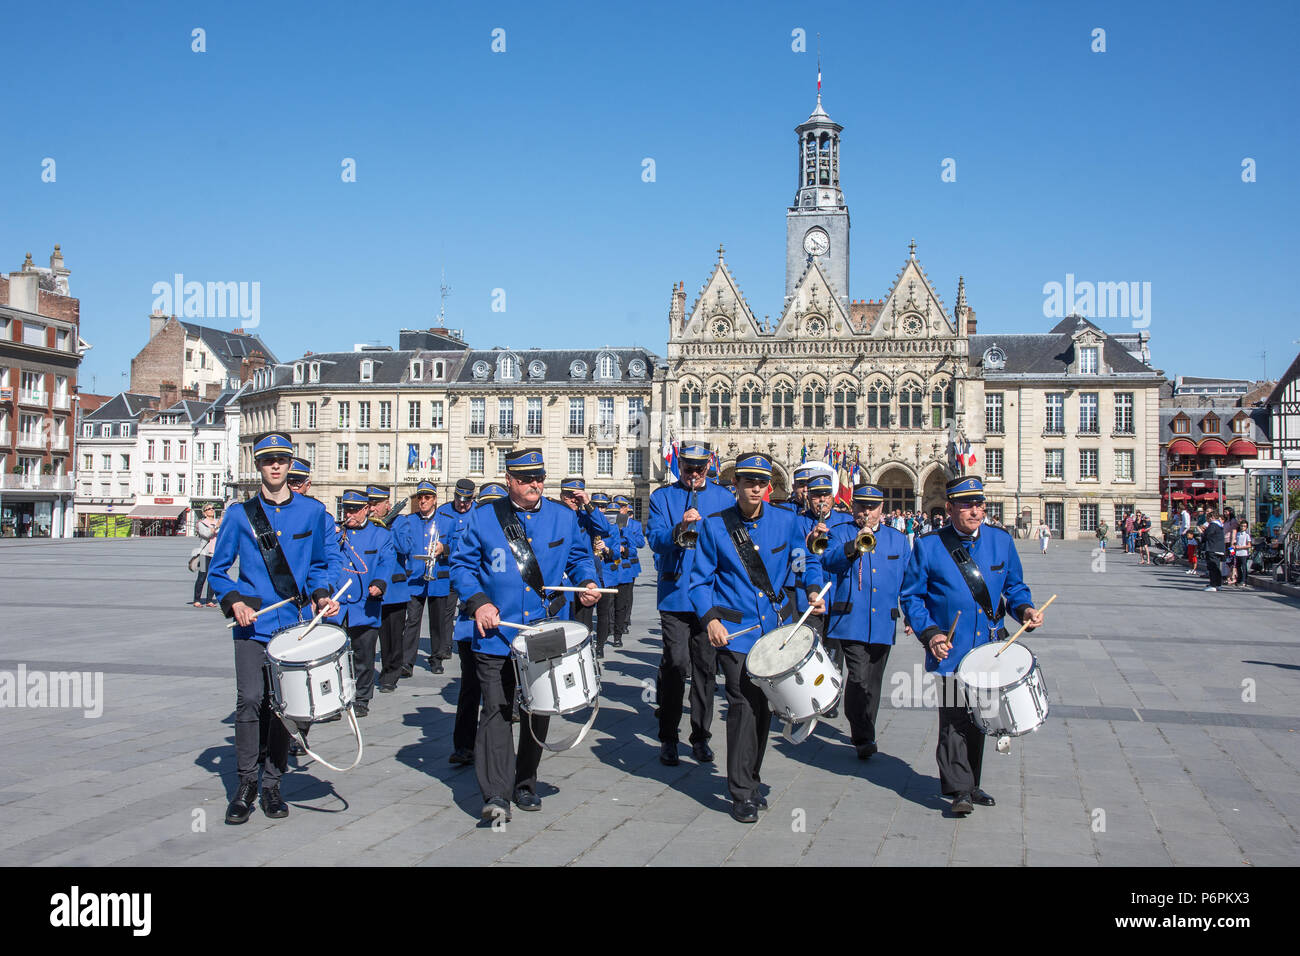 Drummers and band lead the Victory in Europe 8th May parade in Place de l'Hotel de Ville ijnSta Quentin, Aisne, France on 8th May 2918 Stock Photo